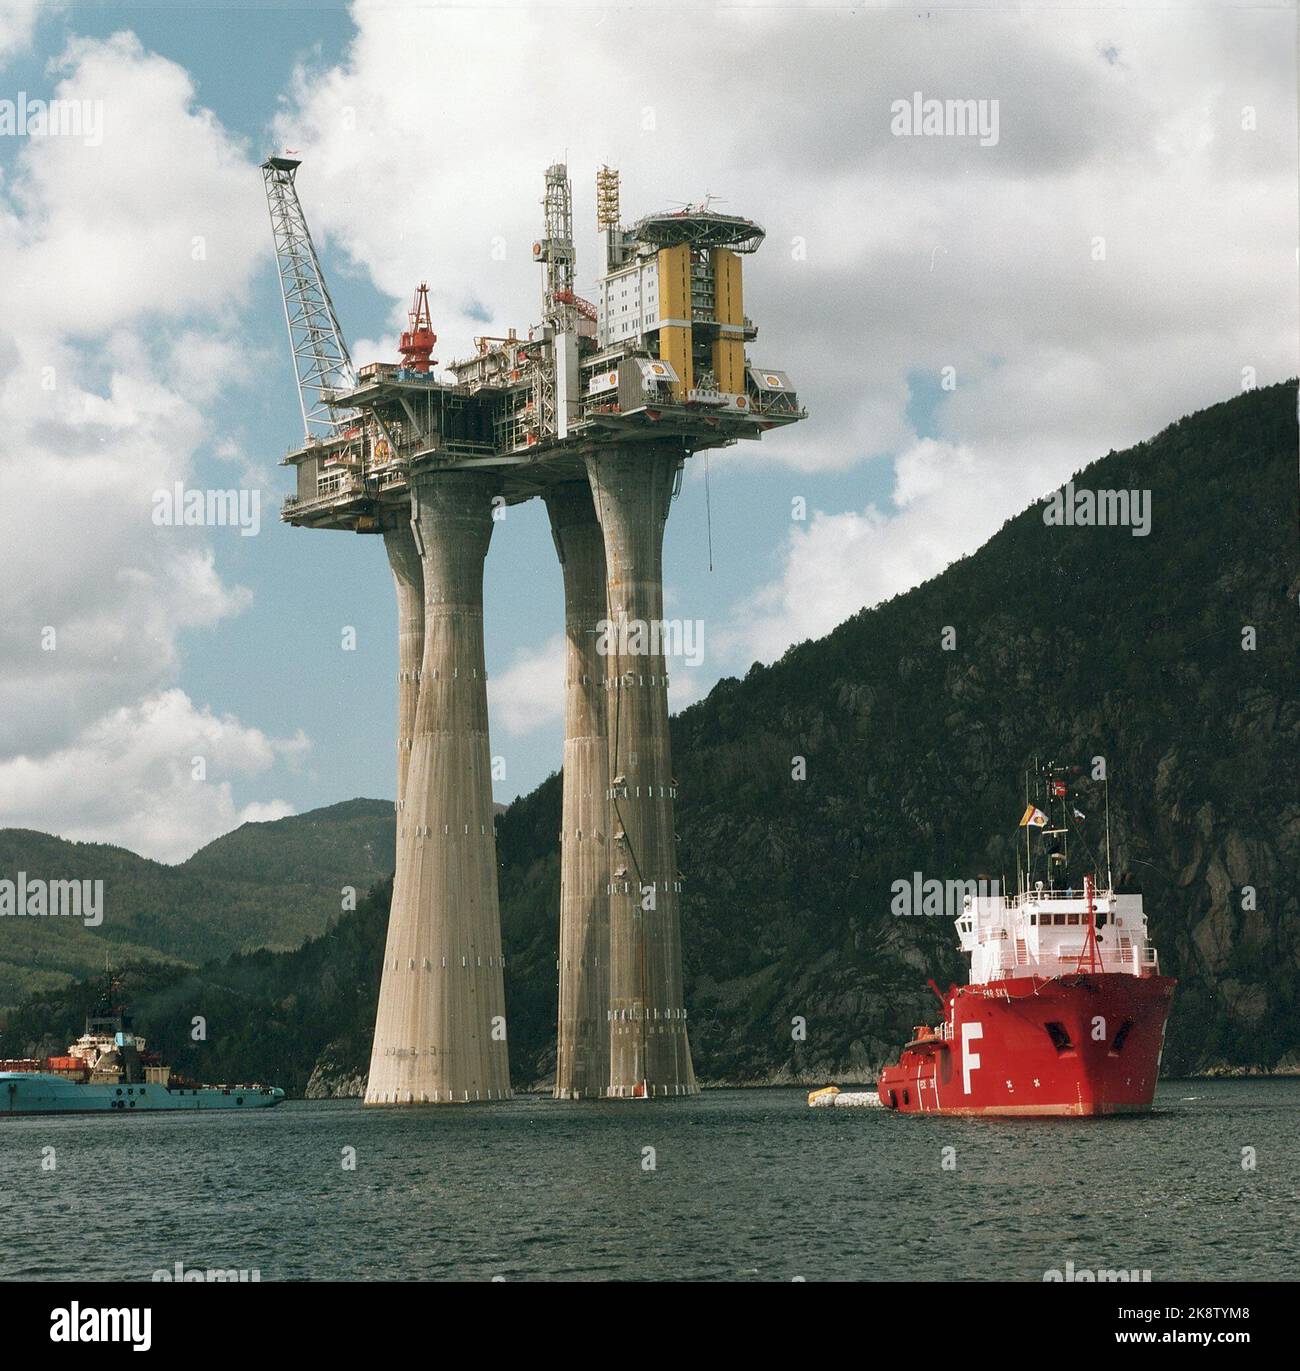 Stavanger 19950511. The world's largest concrete construction, the "Troll" oil platform under tow from Stavanger to the North Sea. Photo: Morten Hval, NTB / NTB Stock Photo